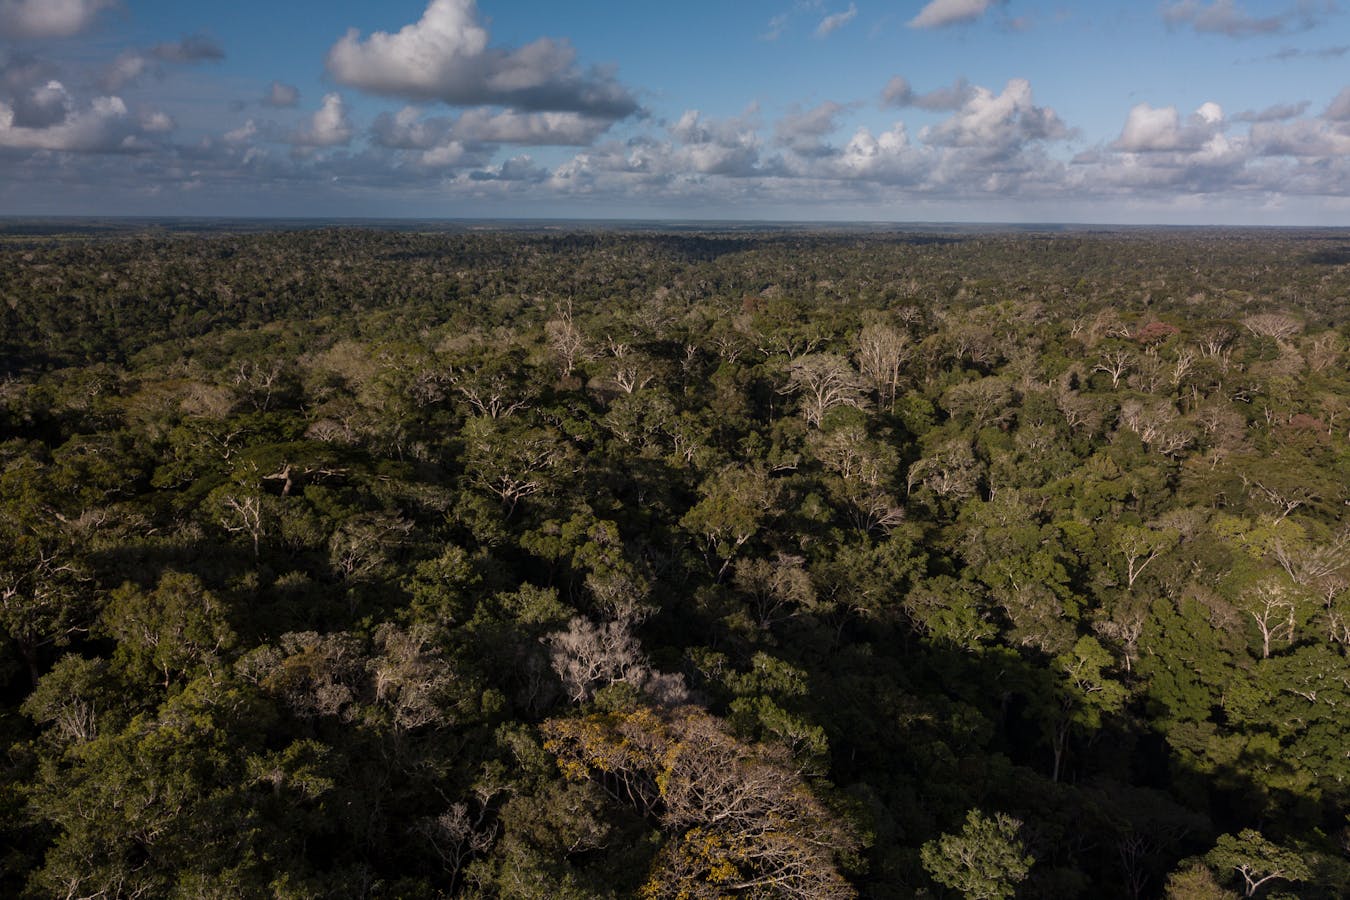 40% of the  Rainforest Is at Tipping Point To Becoming Savanna